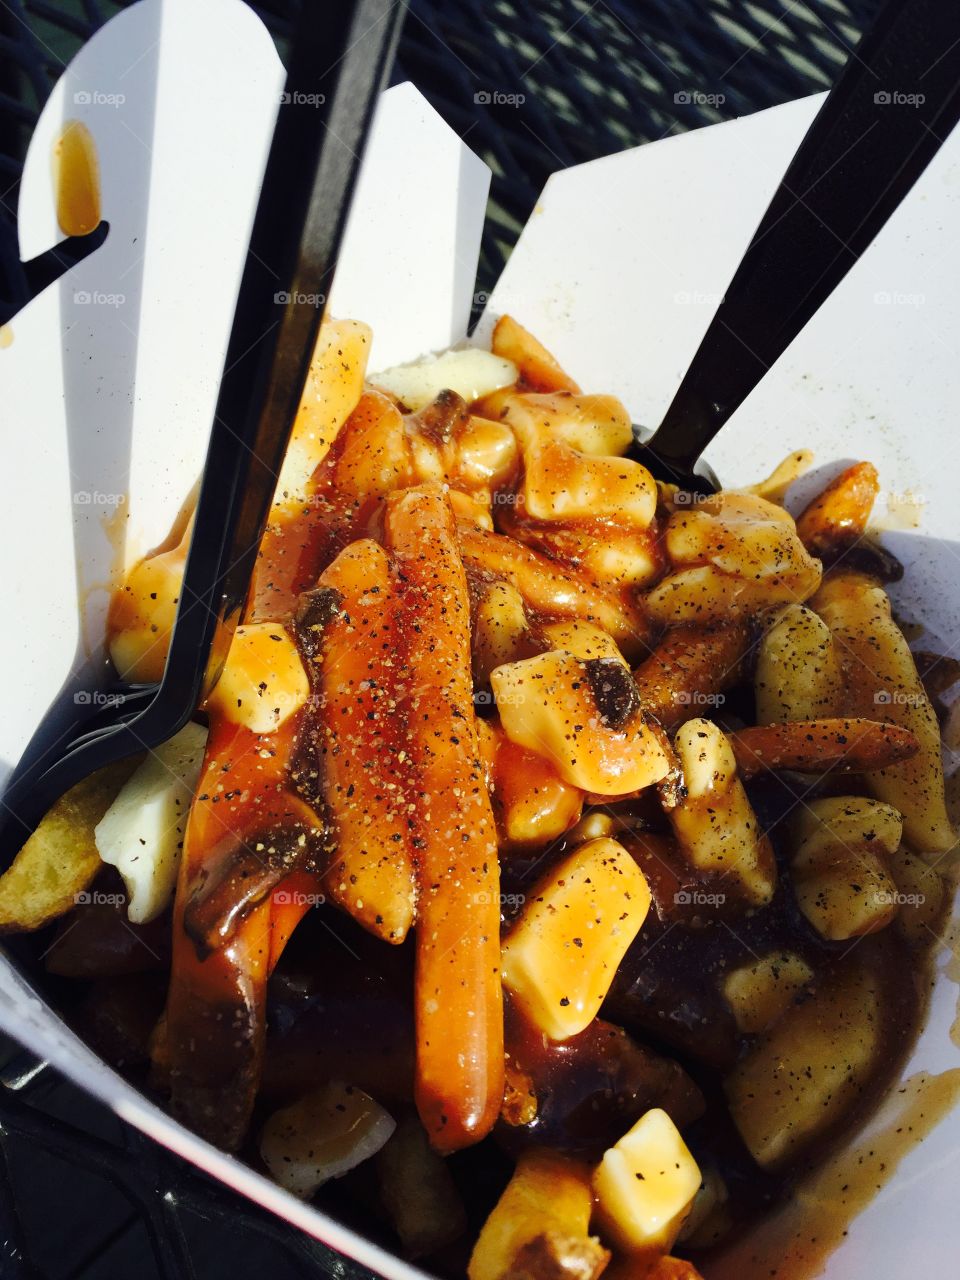 Delicious Poutine. CHeese Curds 